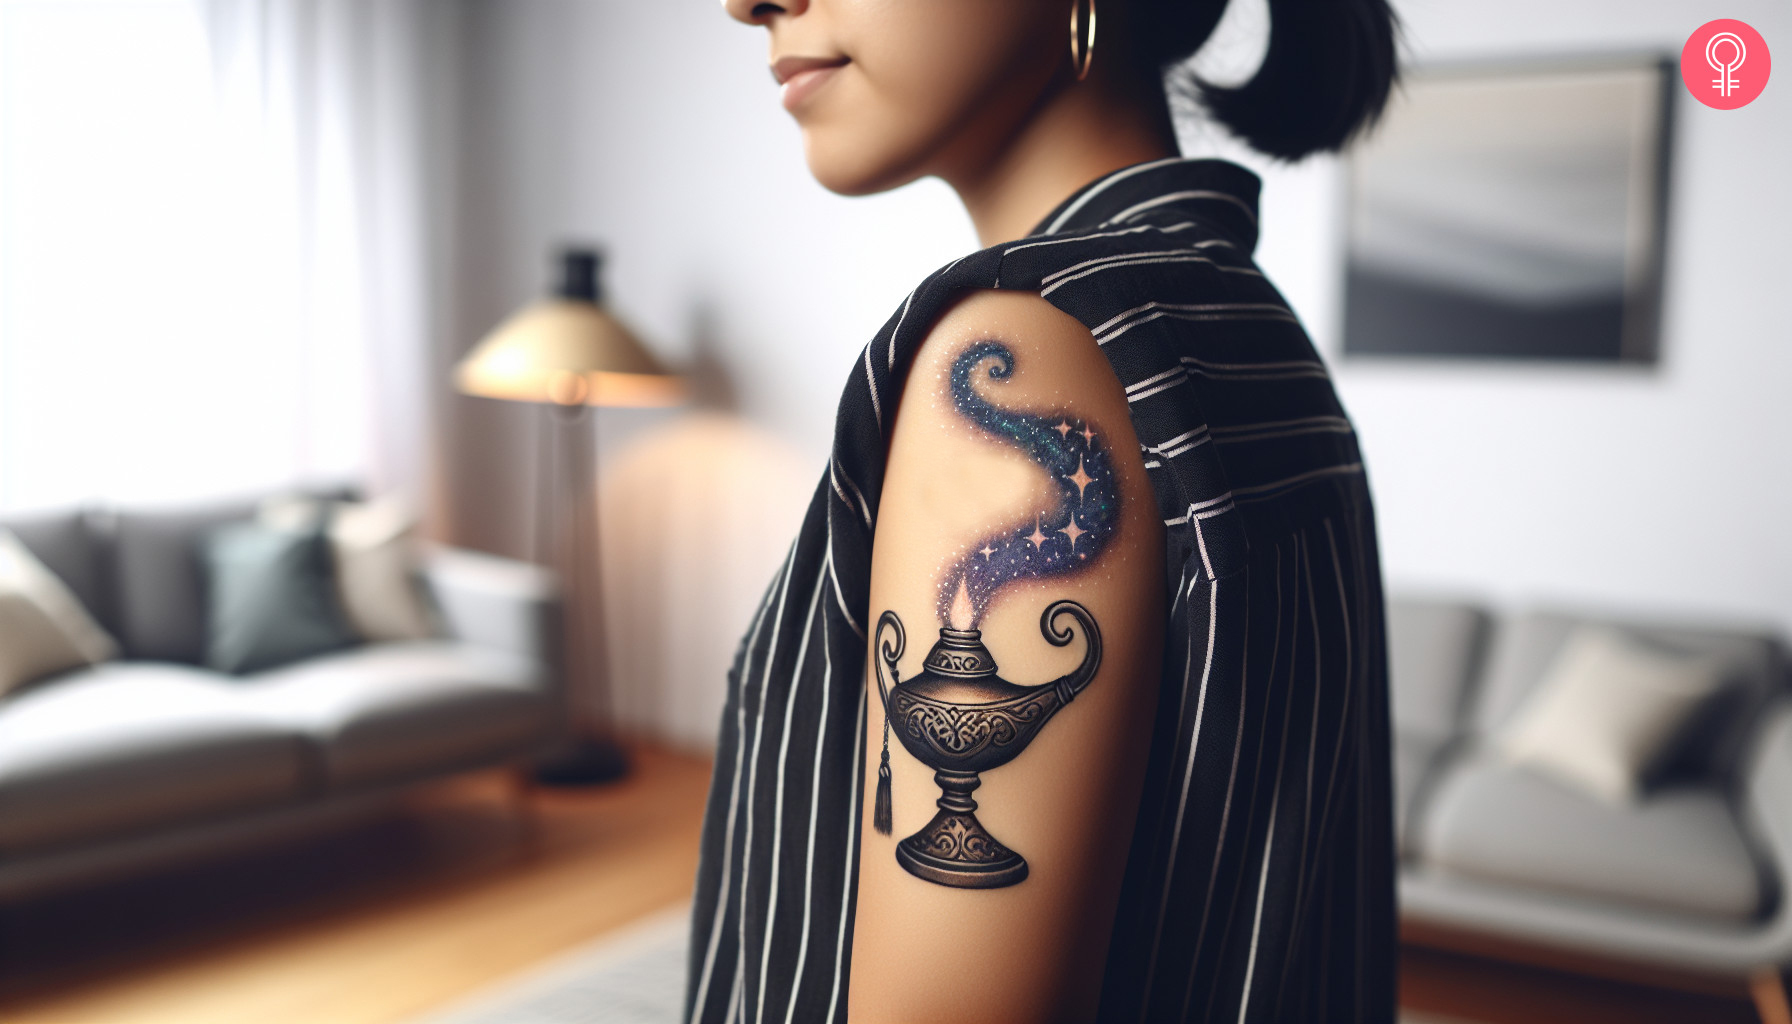 A simple fantasy tattoo on the upper arm featuring a magic lamp